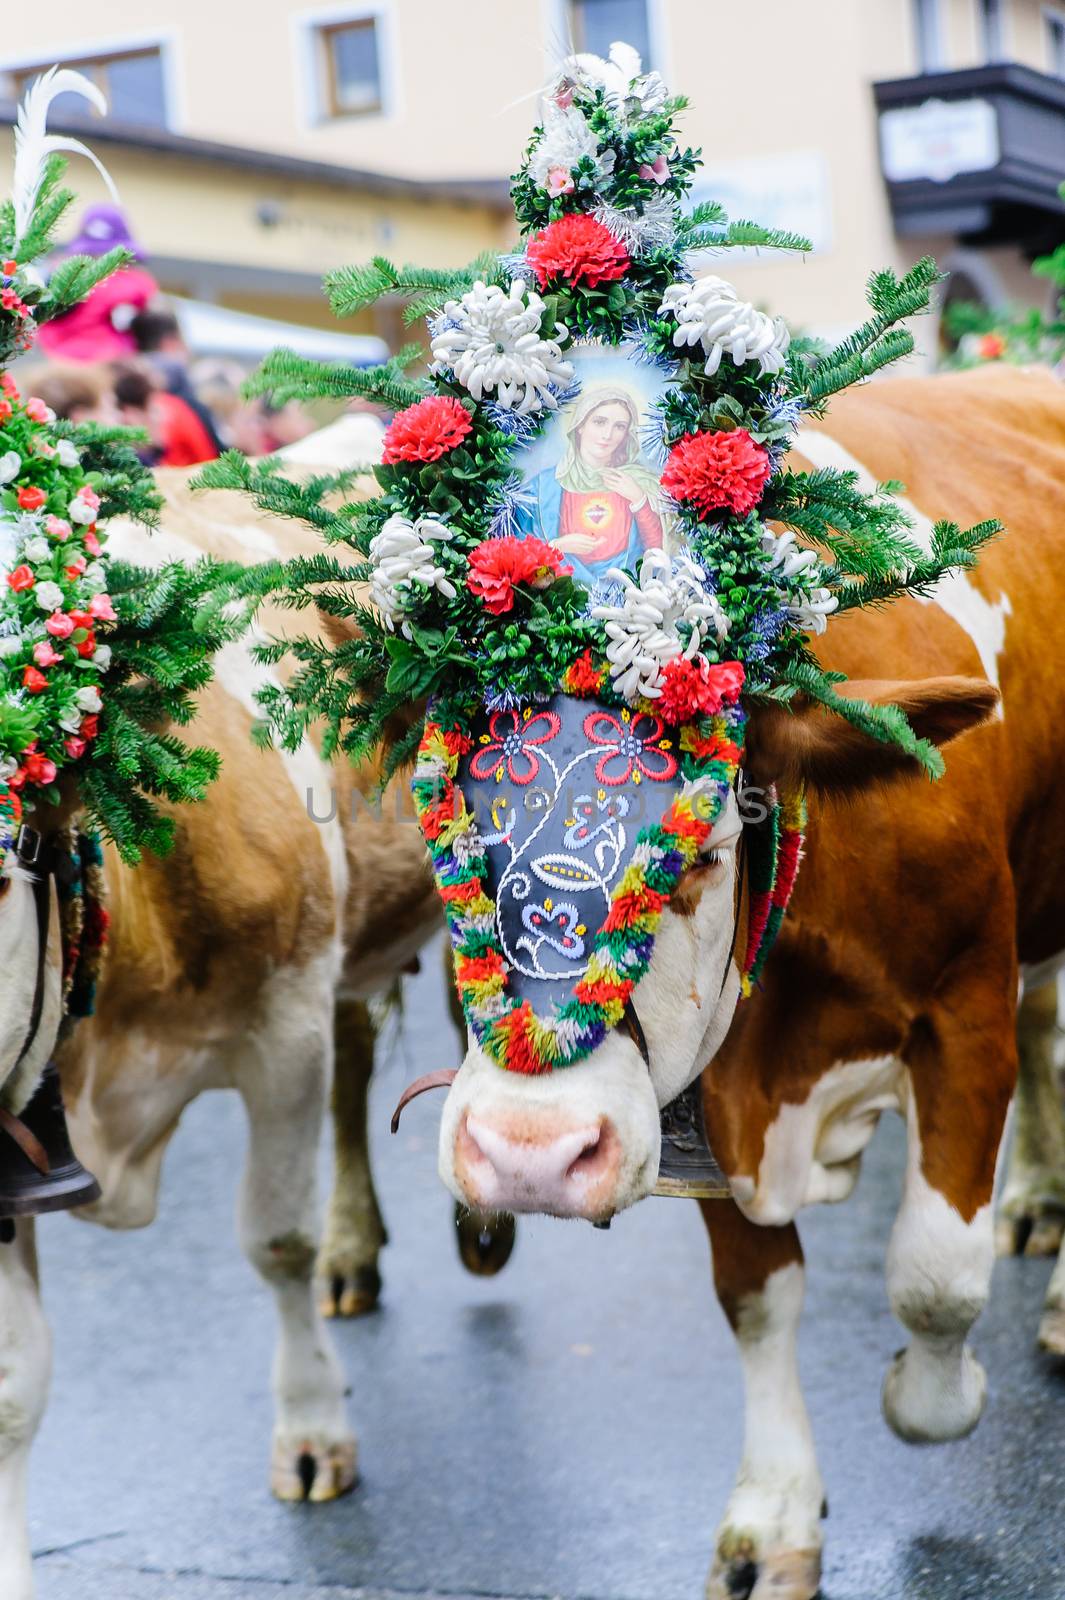 Festival with decorated cows in tyrol, austria